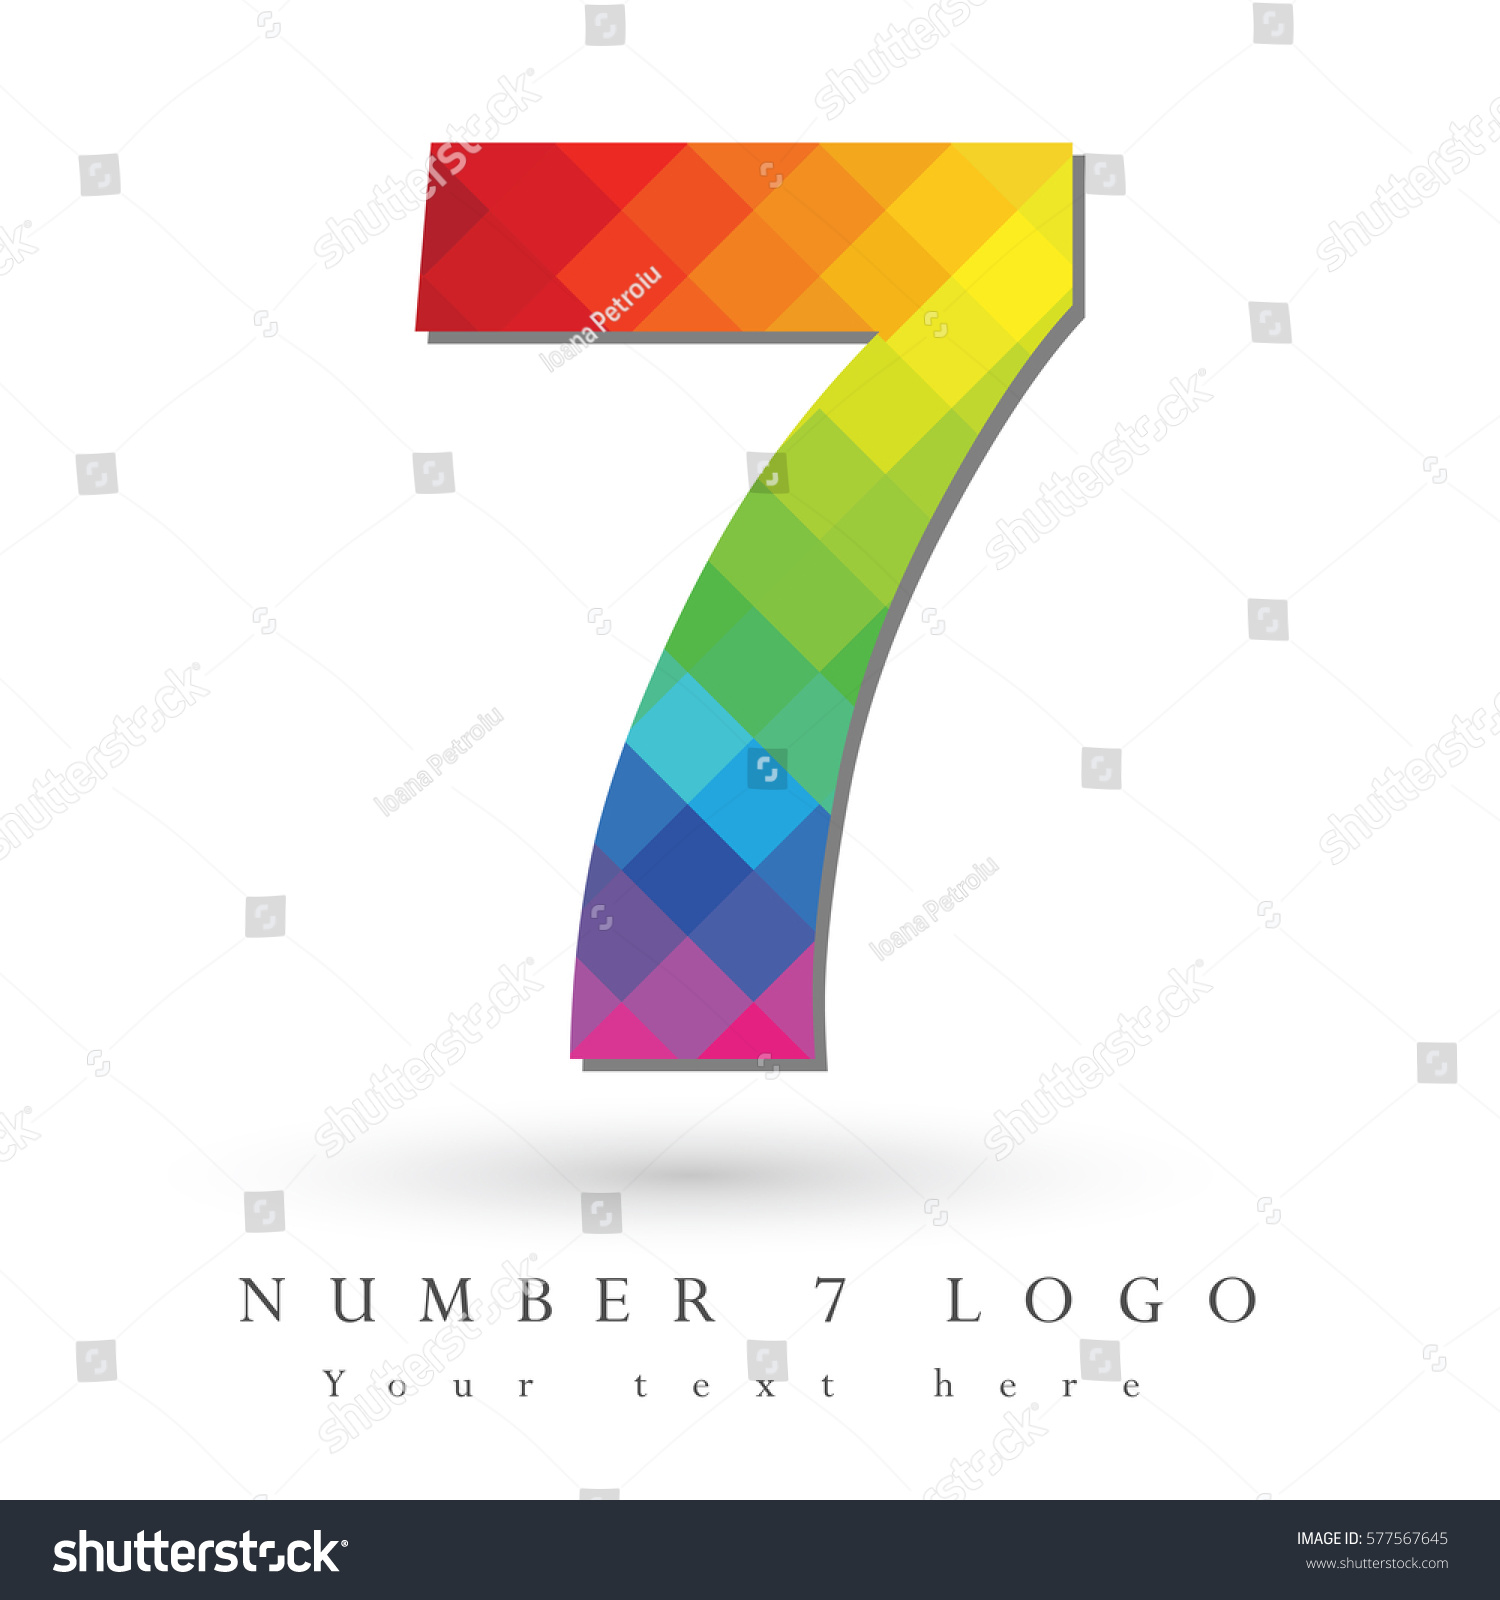 Number 7 Logo Design Concept Rainbow Stock Vector (Royalty Free ...